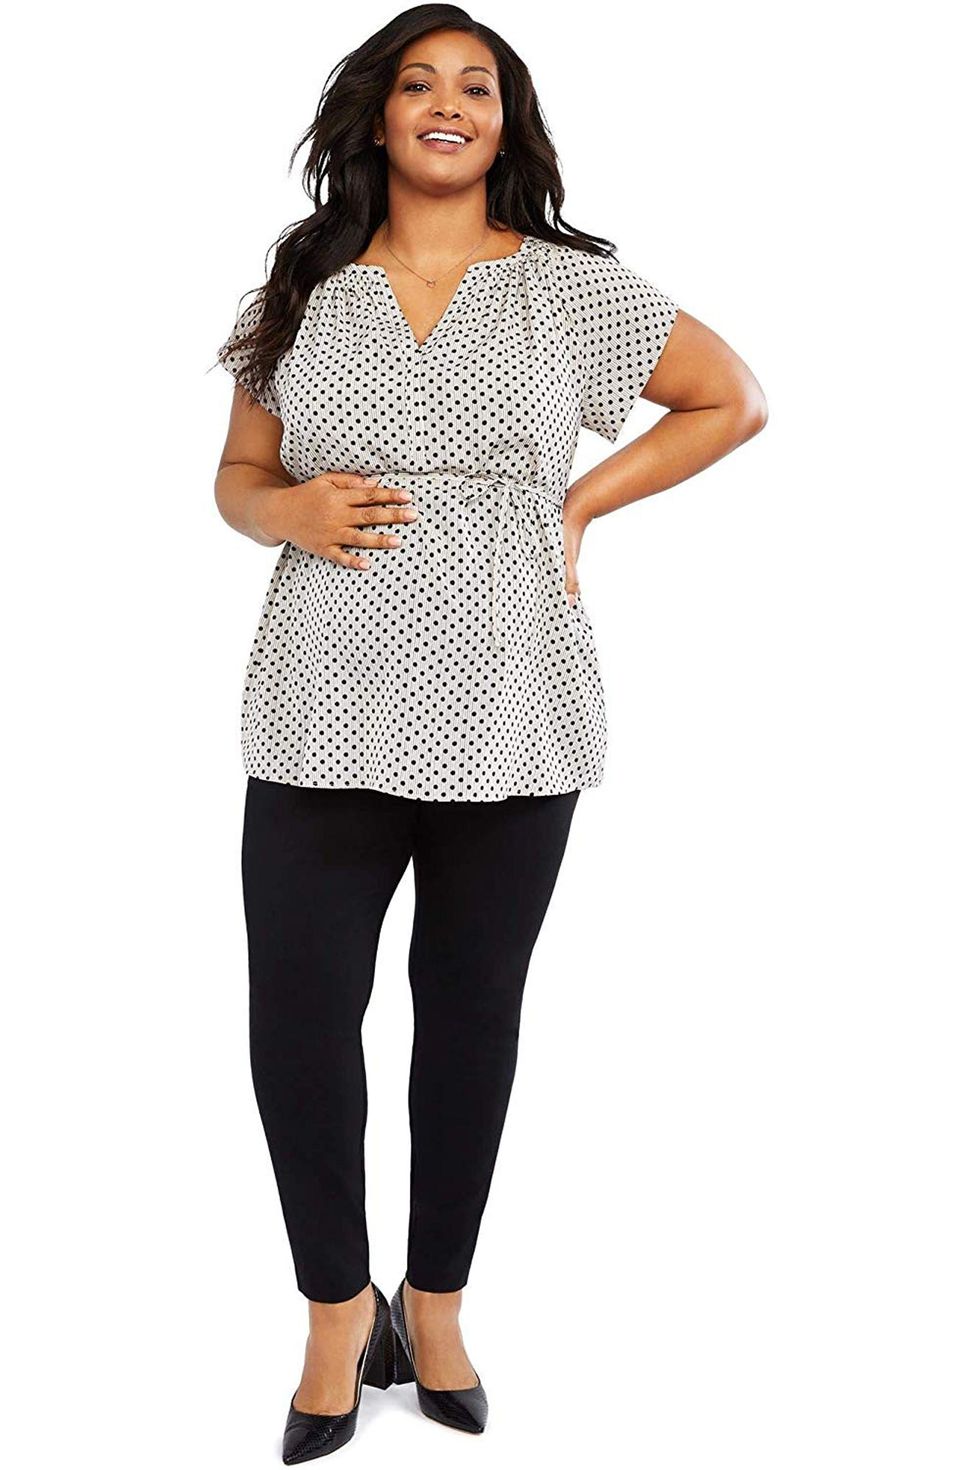 Best Maternity Clothes & Fashion - Macy's